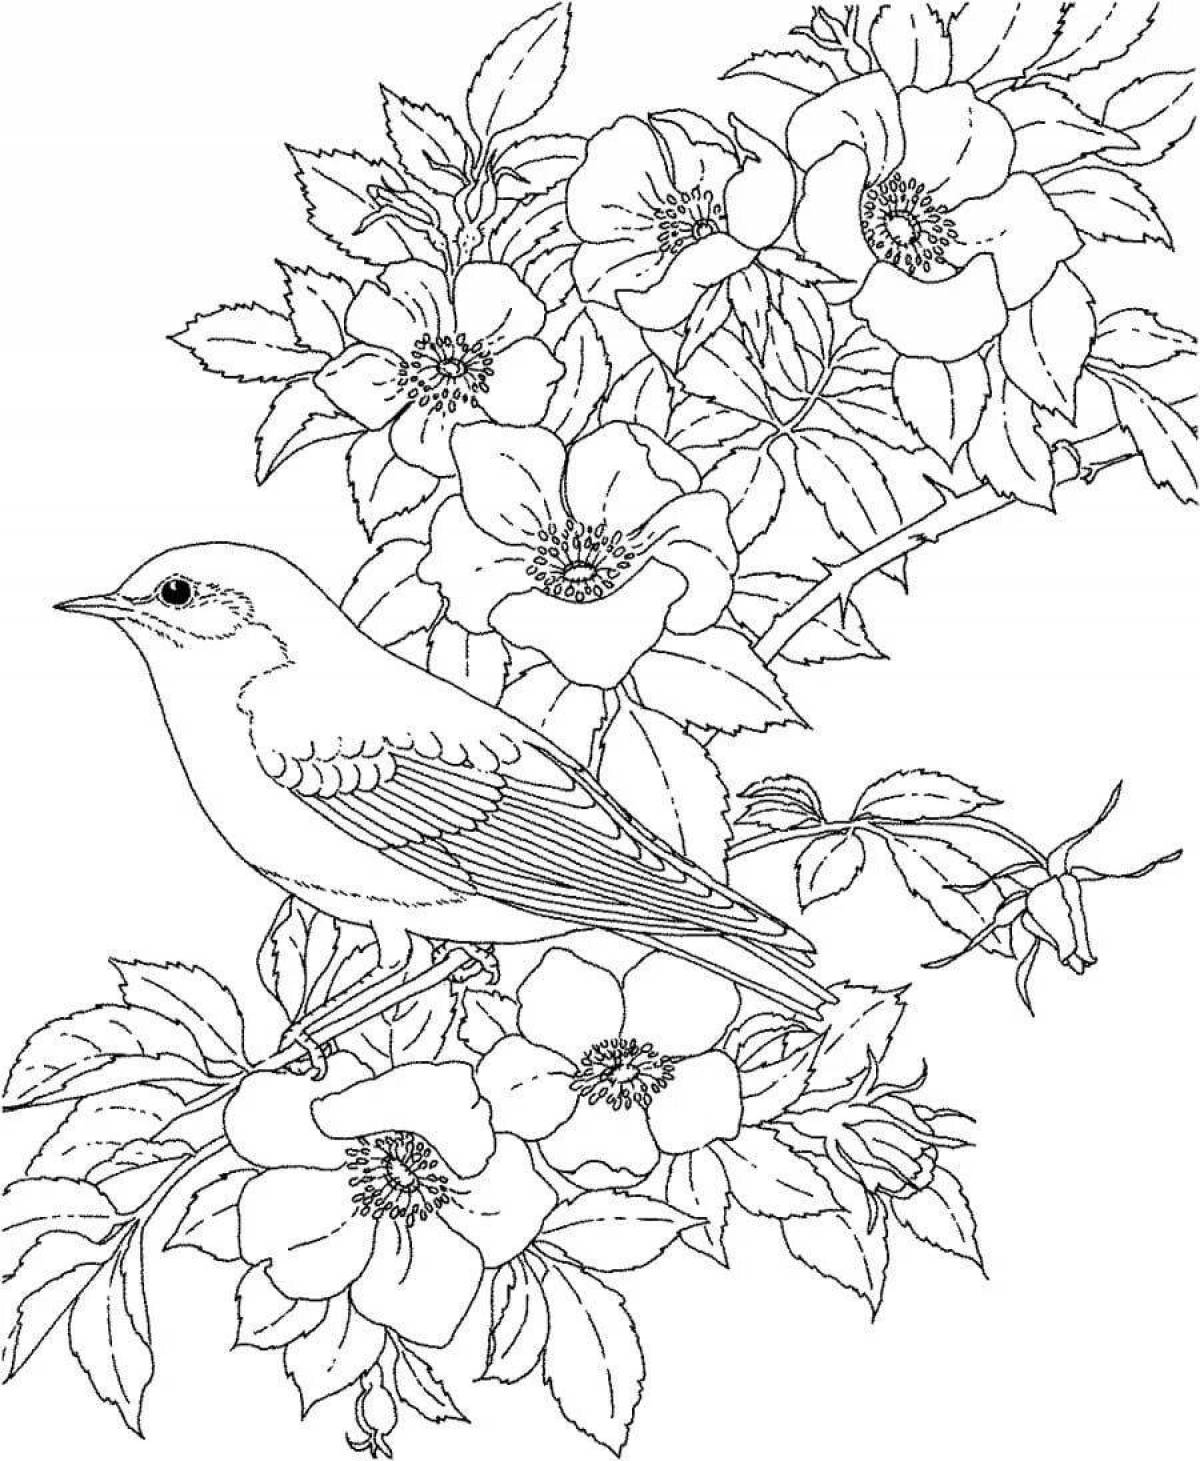 Joyful coloring for girls nature and flowers animals